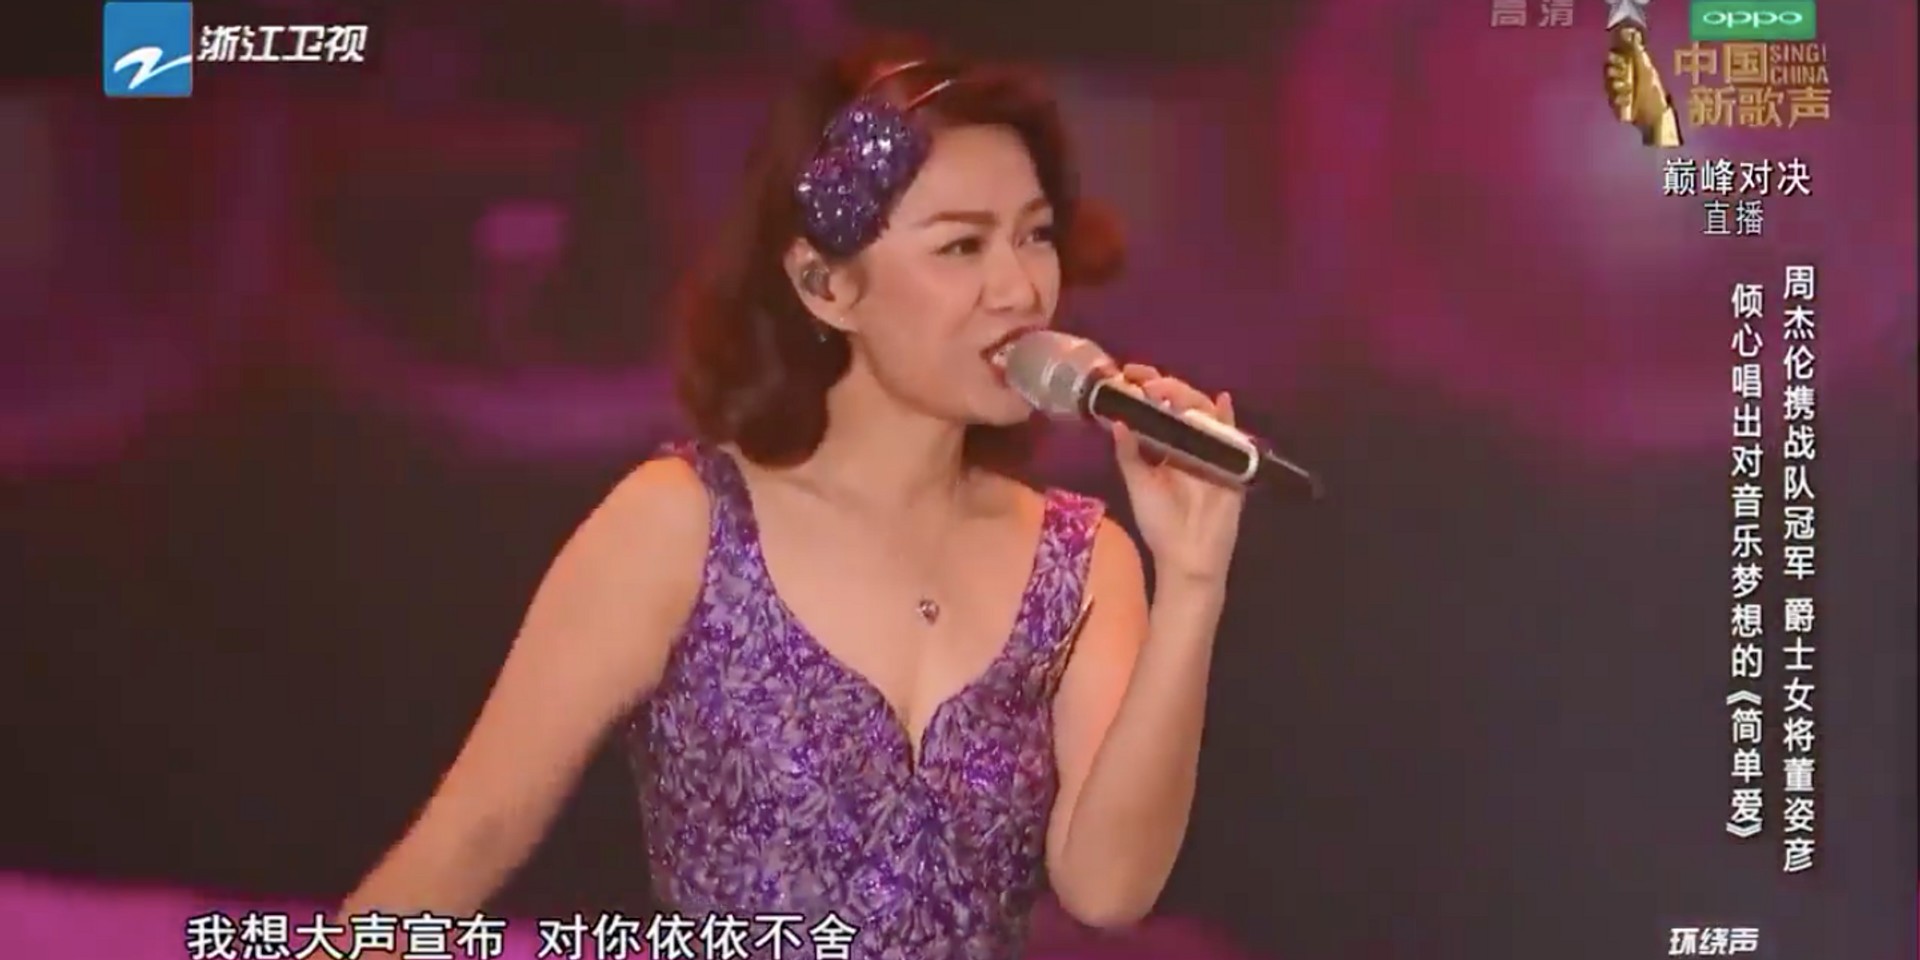 Joanna Dong places third in Sing! China finals 